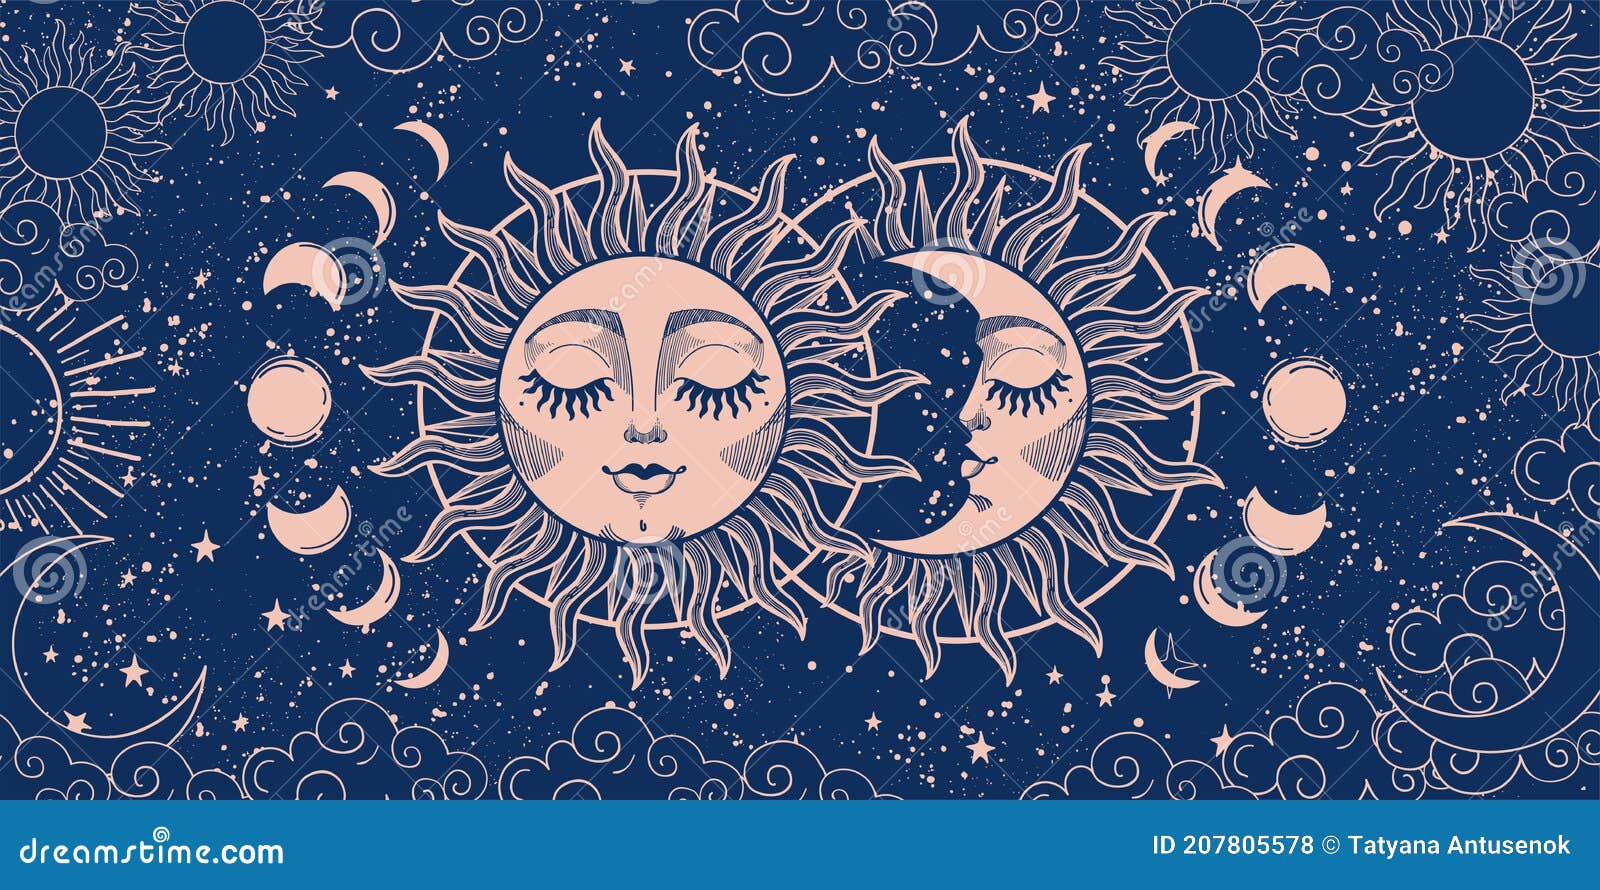 Magic Background for Tarot, Astrology, Magic. the Device of the Universe, Crescent Moon and Sun a Face on a Blue Background Stock Illustration - Illustration of flat, magic: 207805578